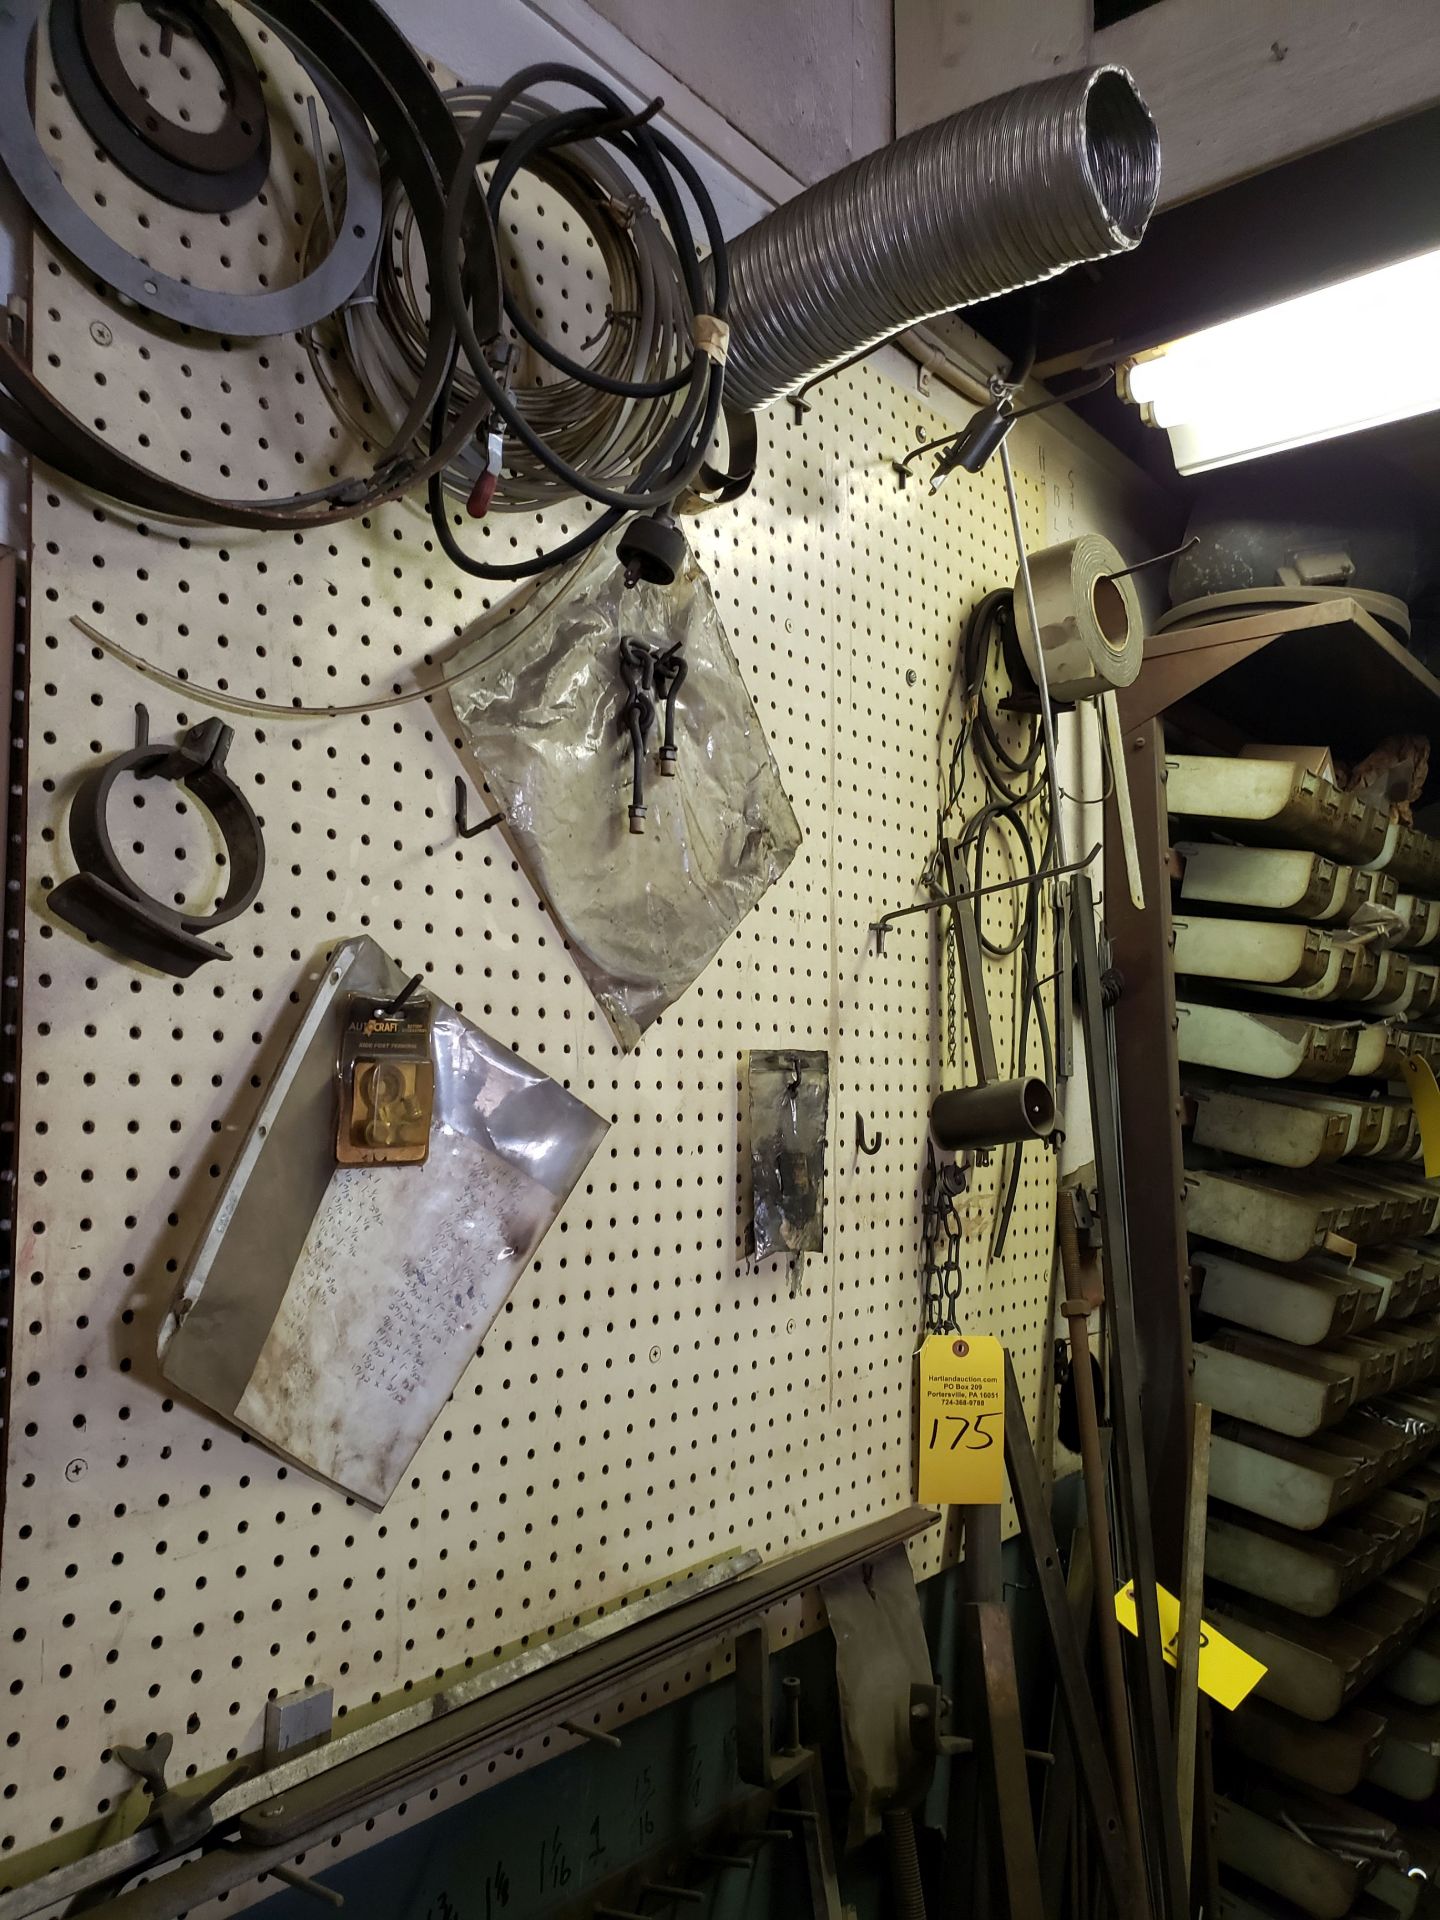 FASTENERS & RACK, MISC METALS ALONG WALL & ON PEGBOARD - Image 5 of 6